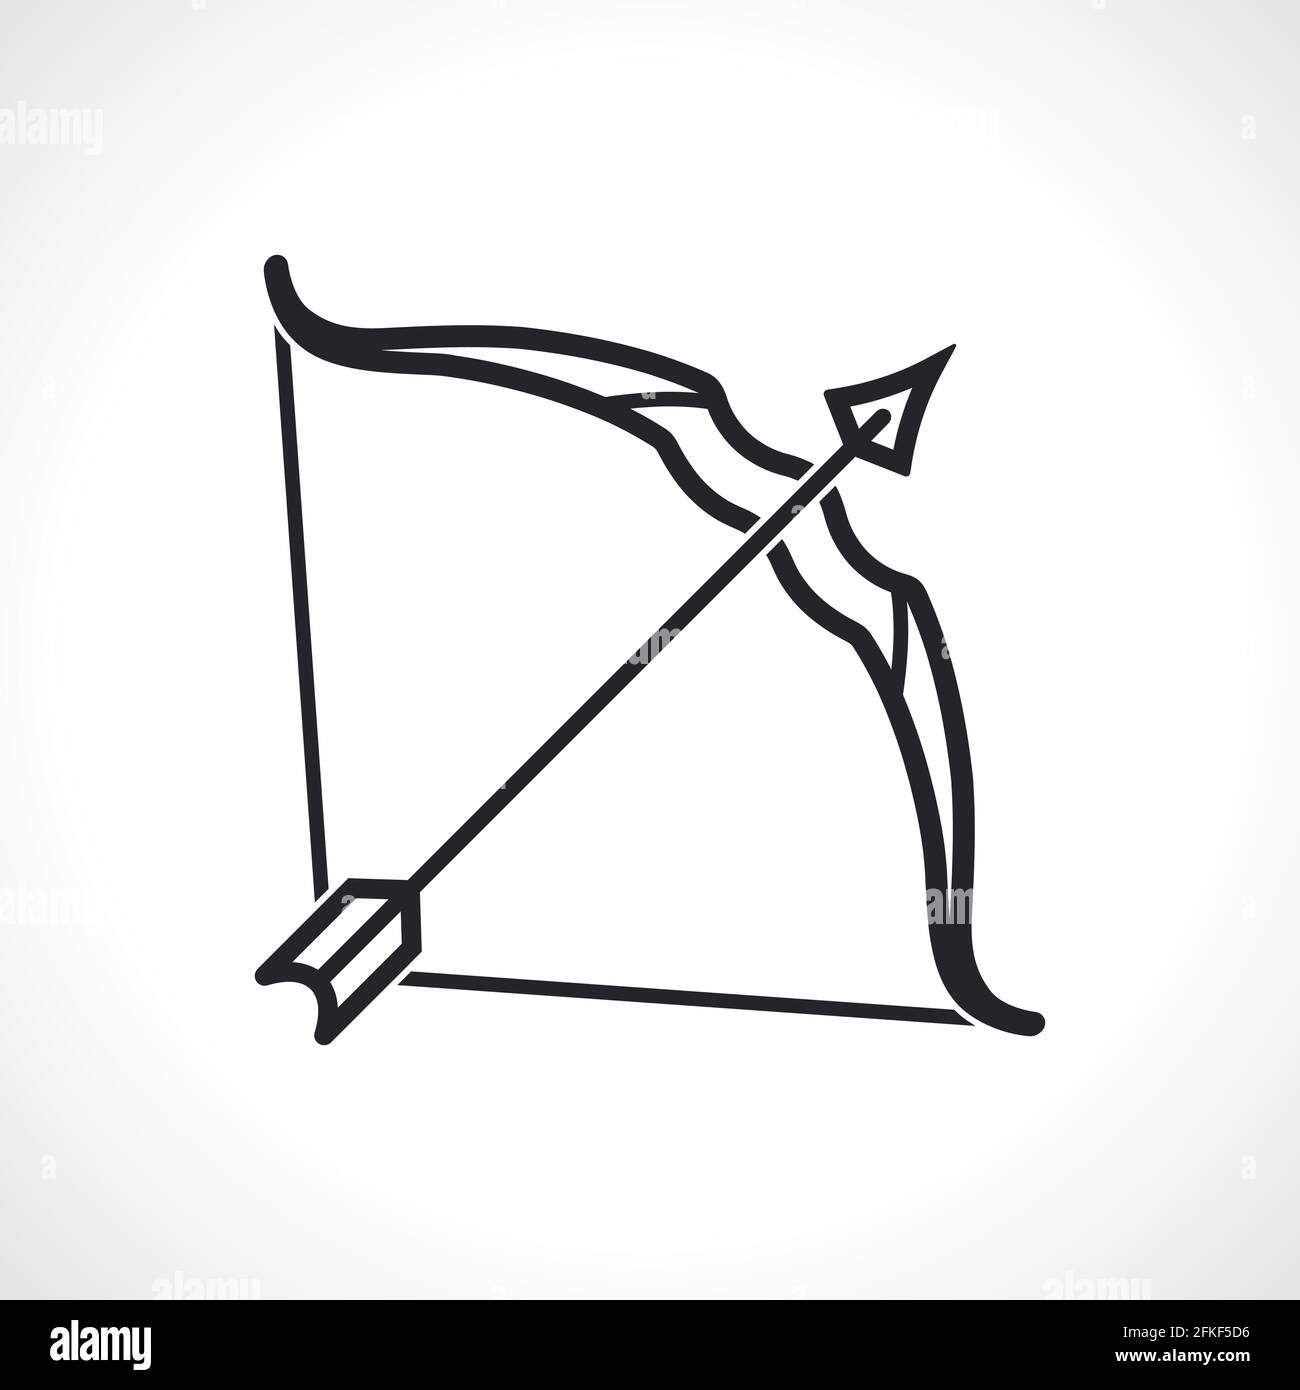 Bow and arrow line icon vector image Stock Vector